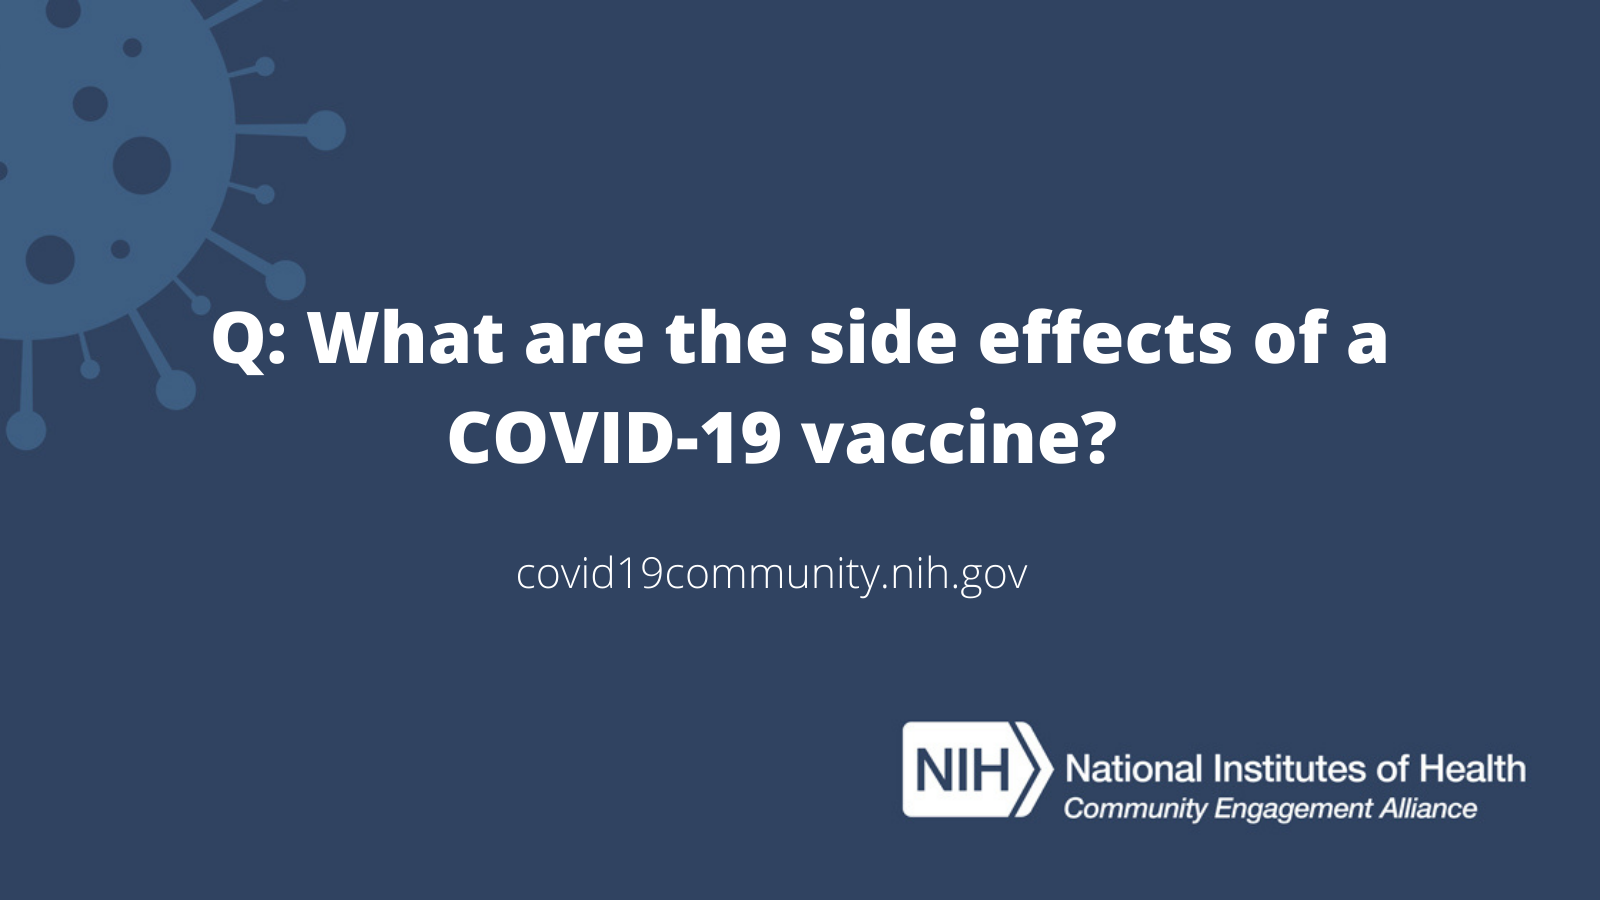 Text reads: “Q: What are the side effects of a COVID-19 vaccine?"